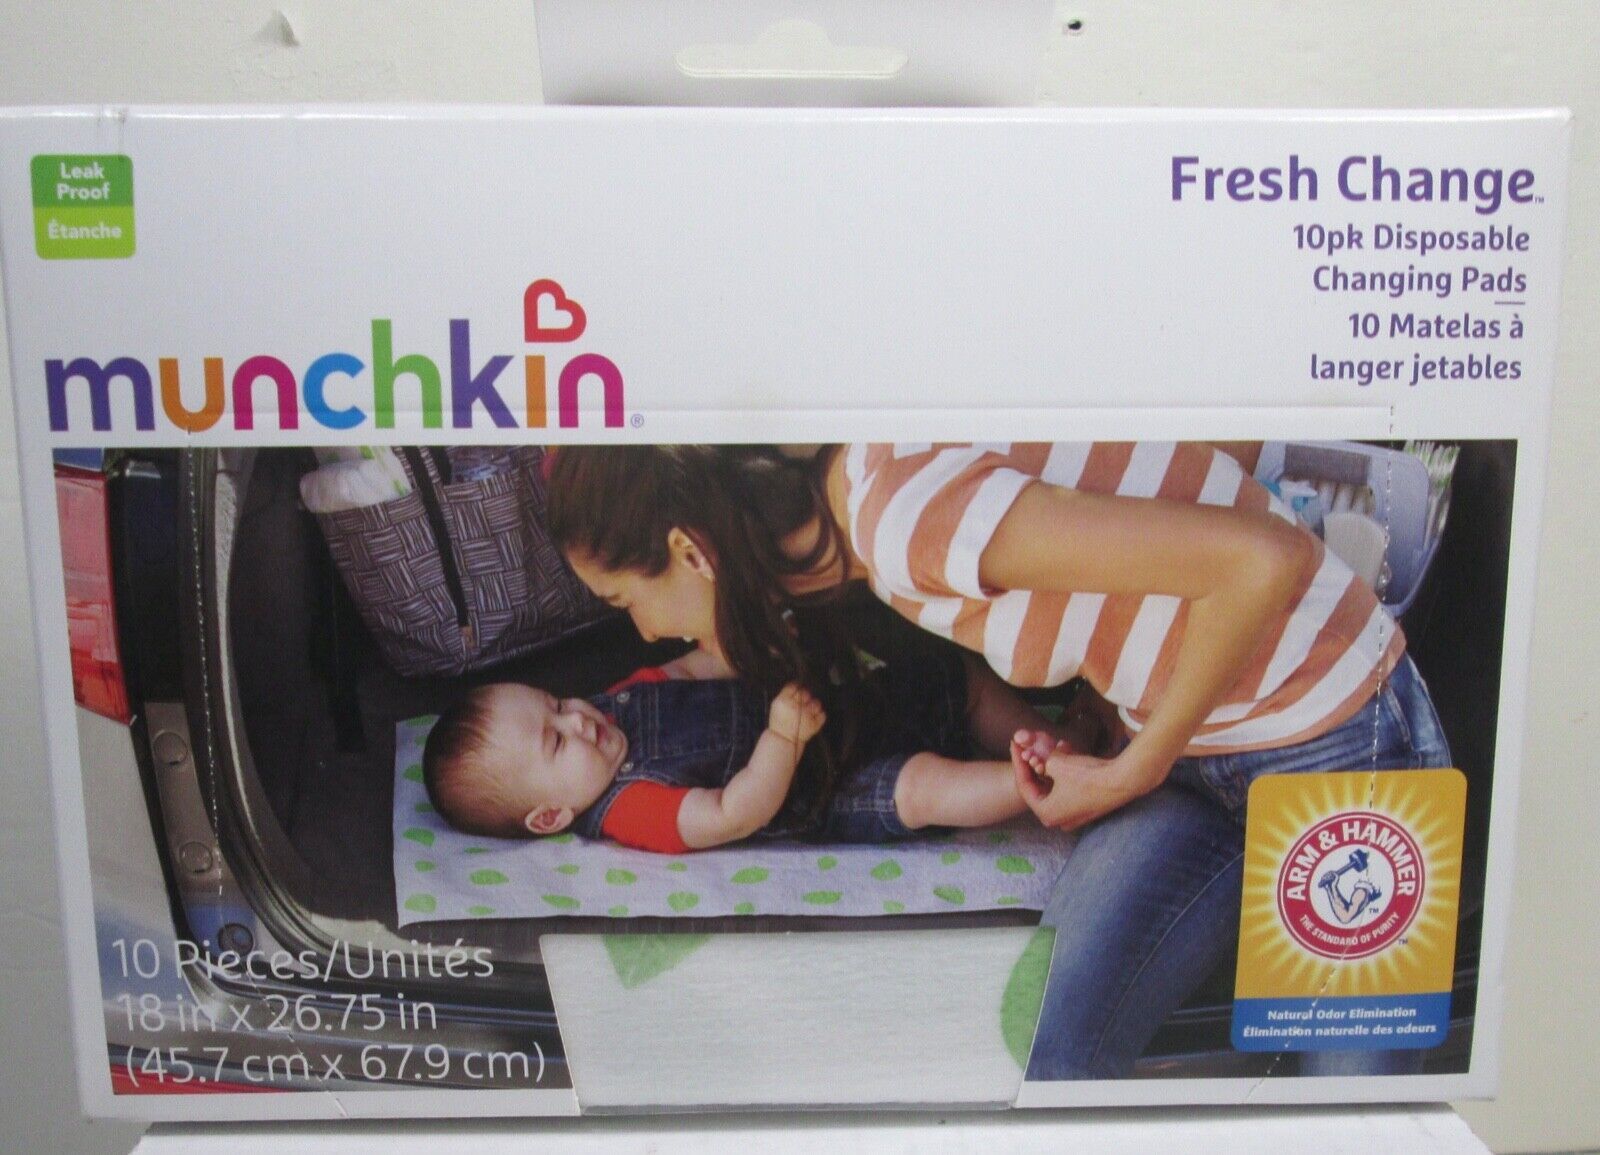 Munchkin Disposable Changing Pads Fresh Change Ultra Absorbent Layer Pads 10 Ct - $11.39